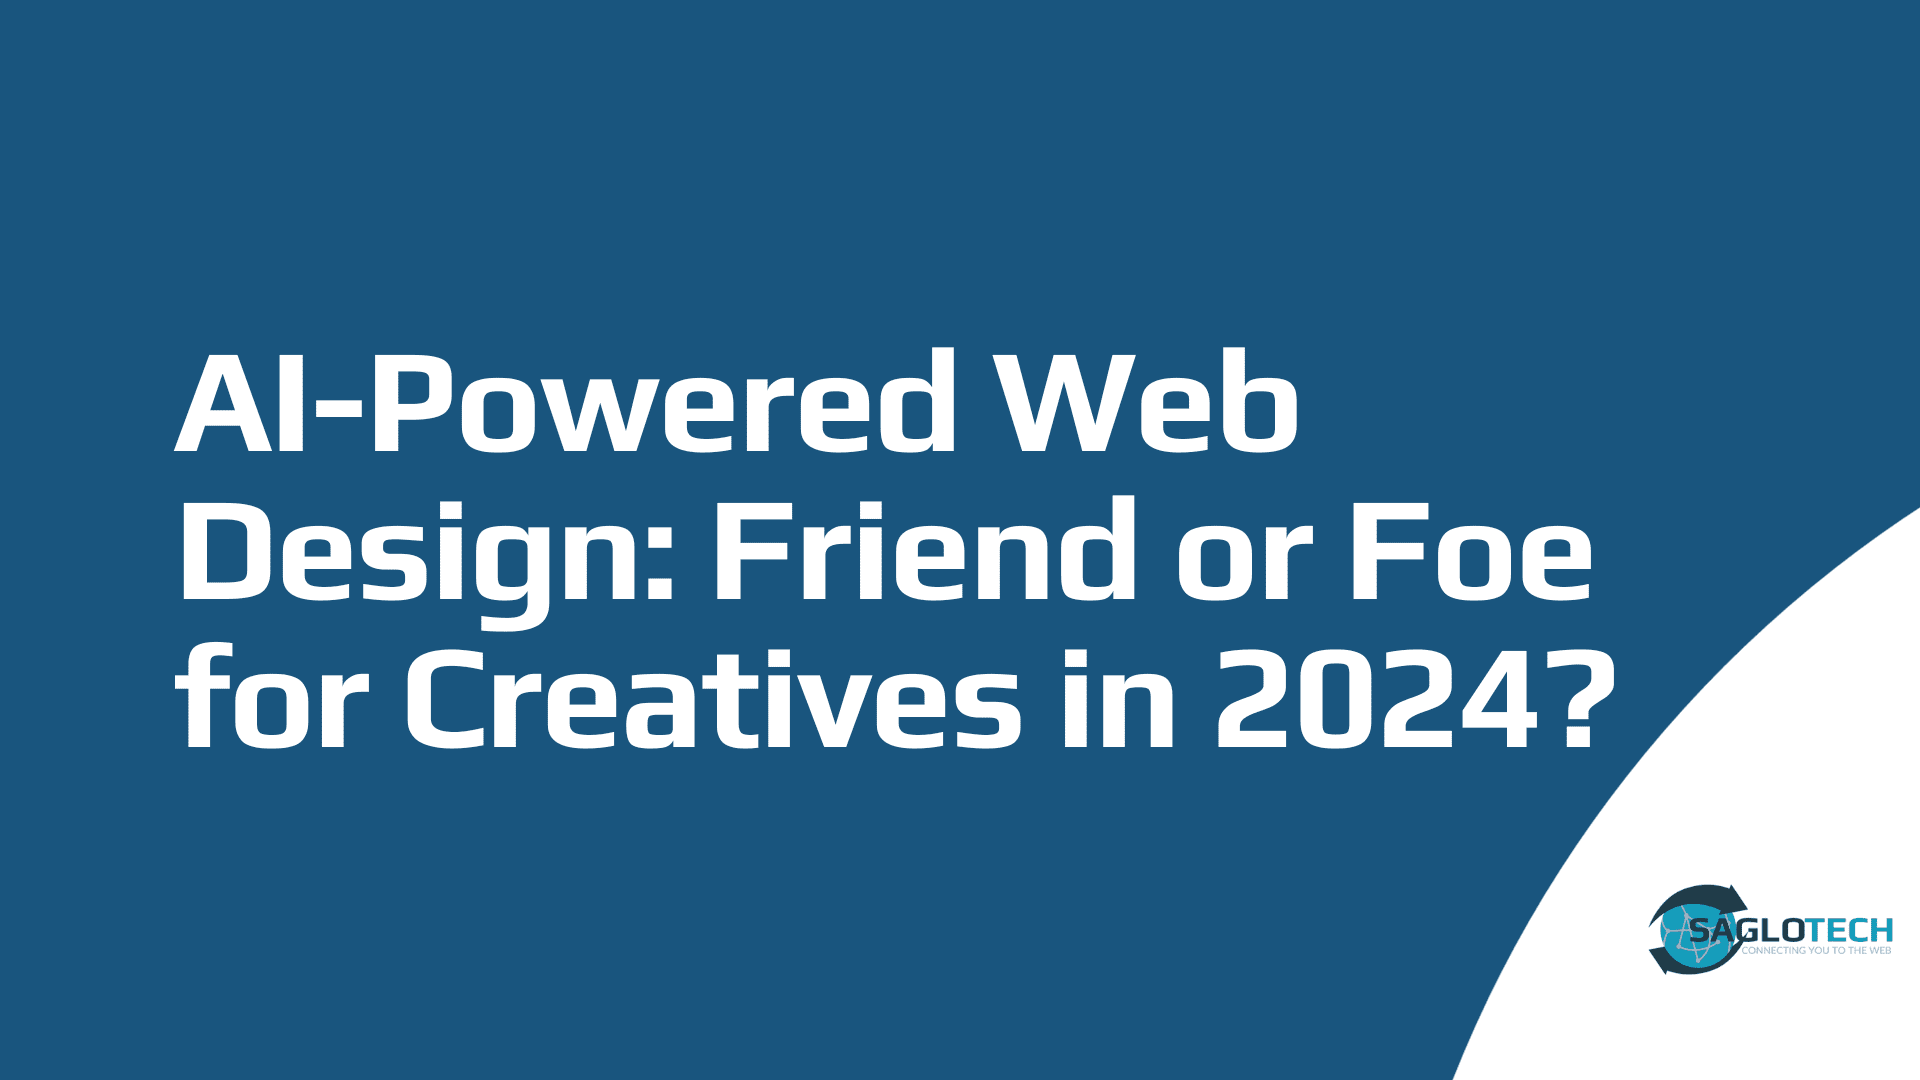 AI-Powered Web Design: Friend or Foe for Creatives in 2024?